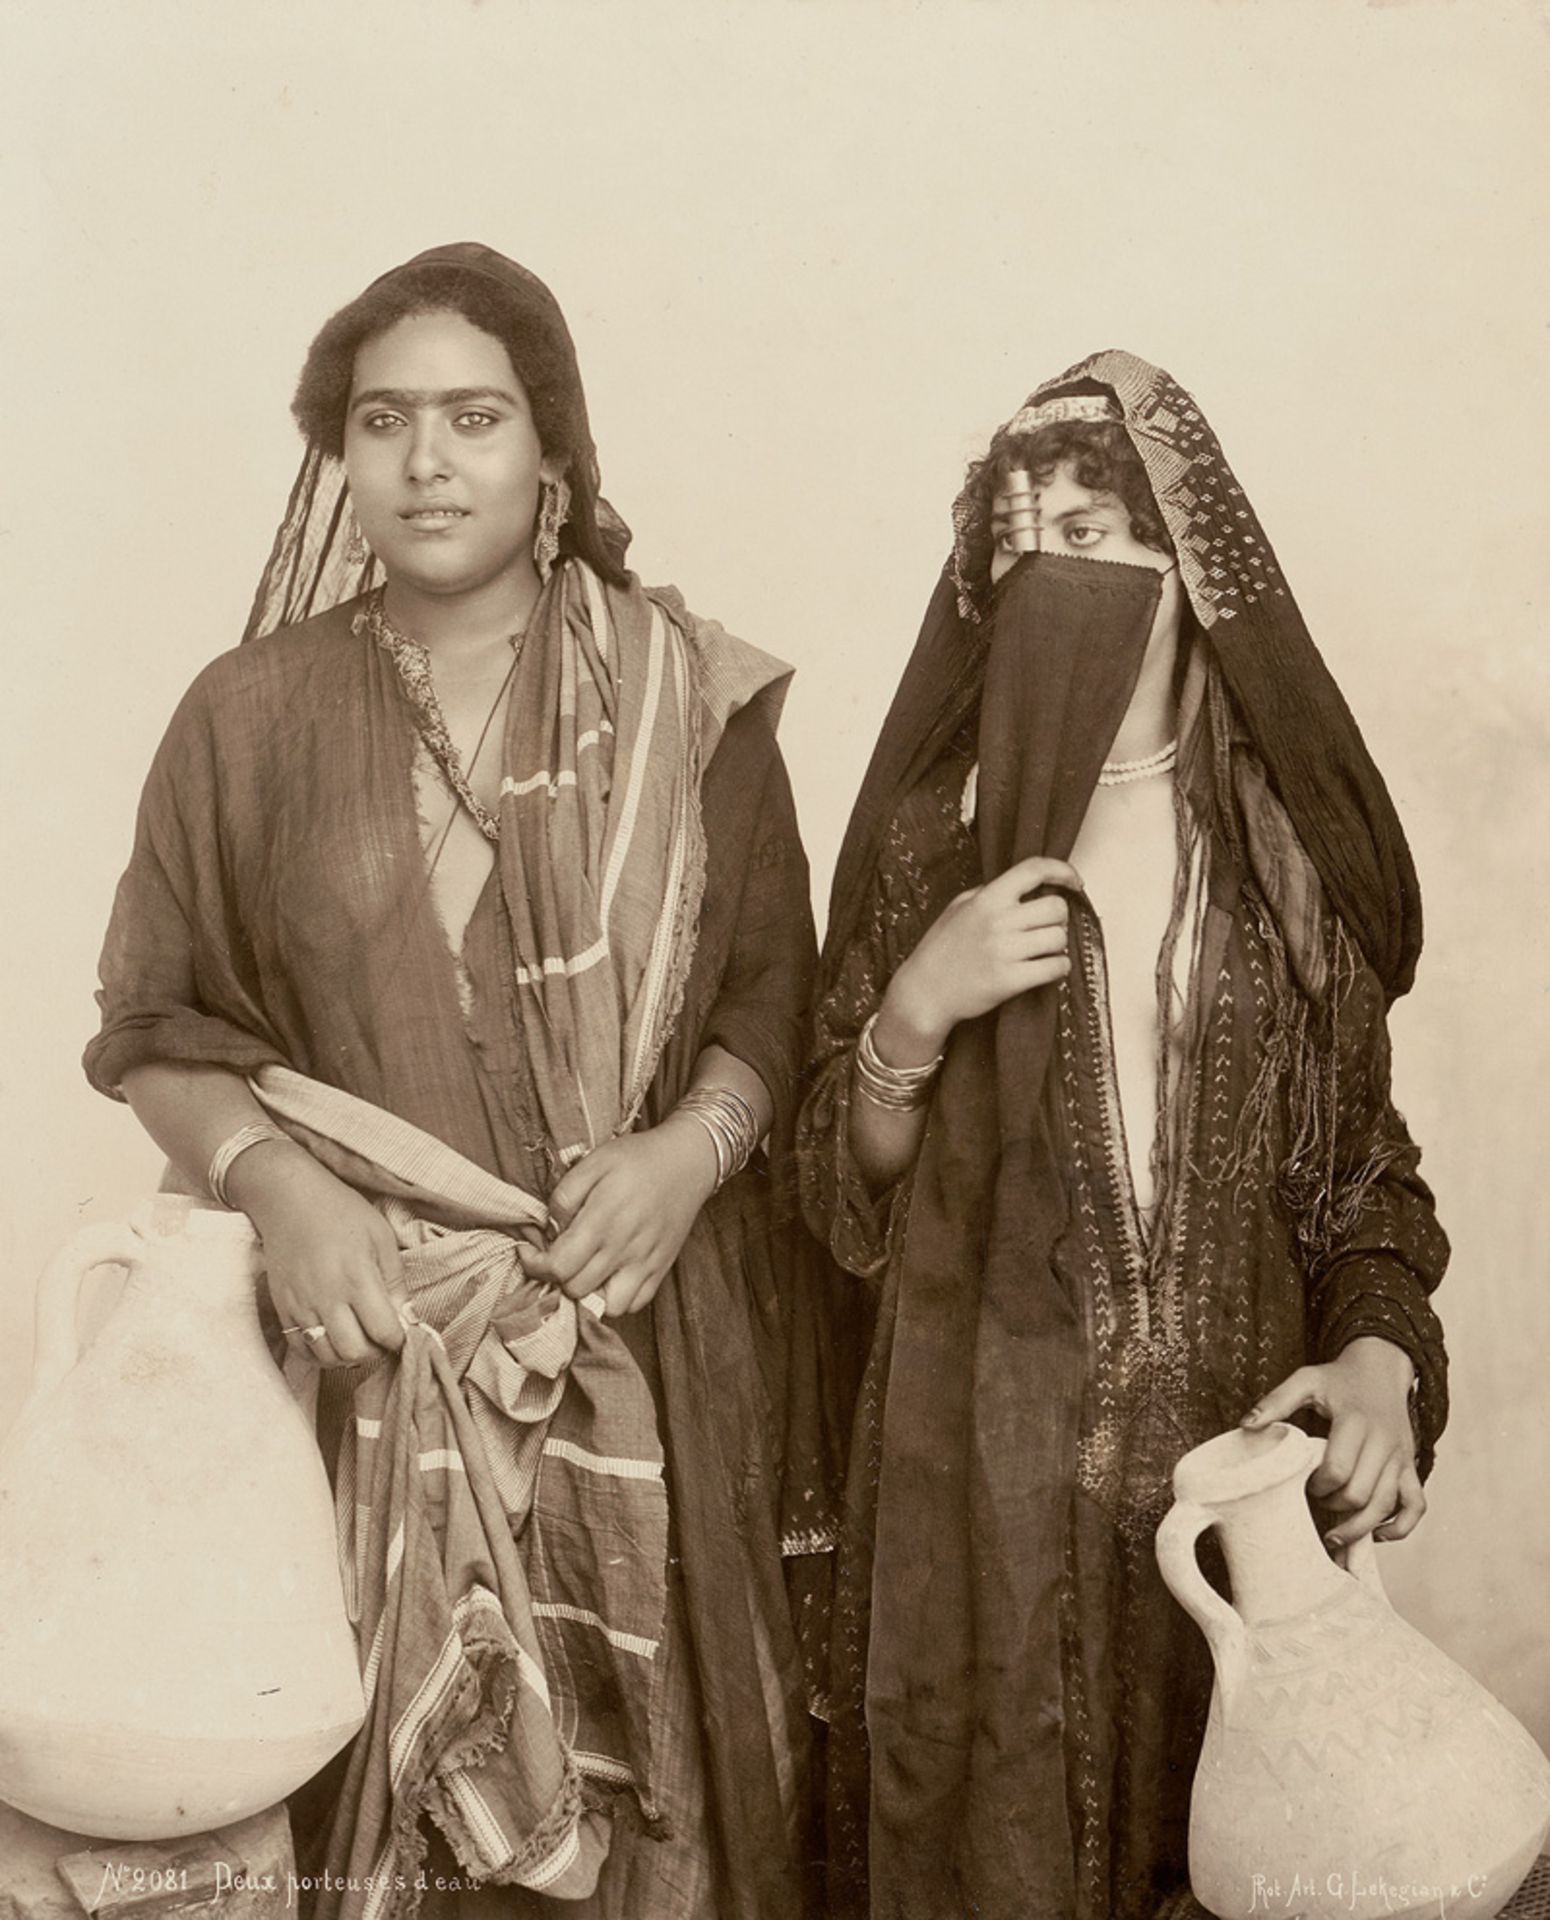 Lékégian, G.: Two female water carriers